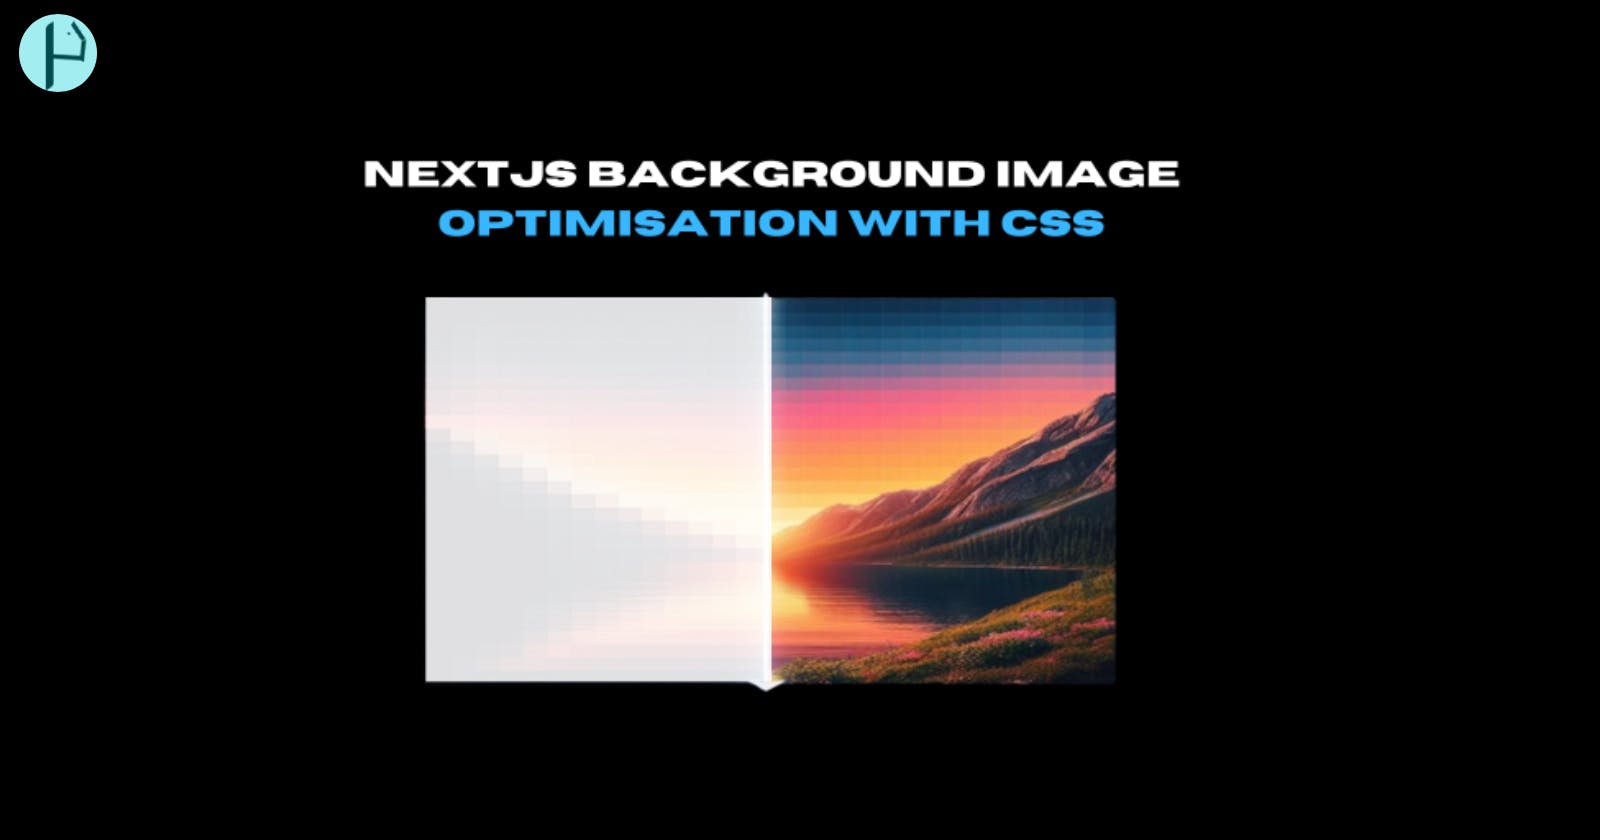 Load Background Images Faster in Next.js with CSS/Tailwind CSS (No CDN Required)